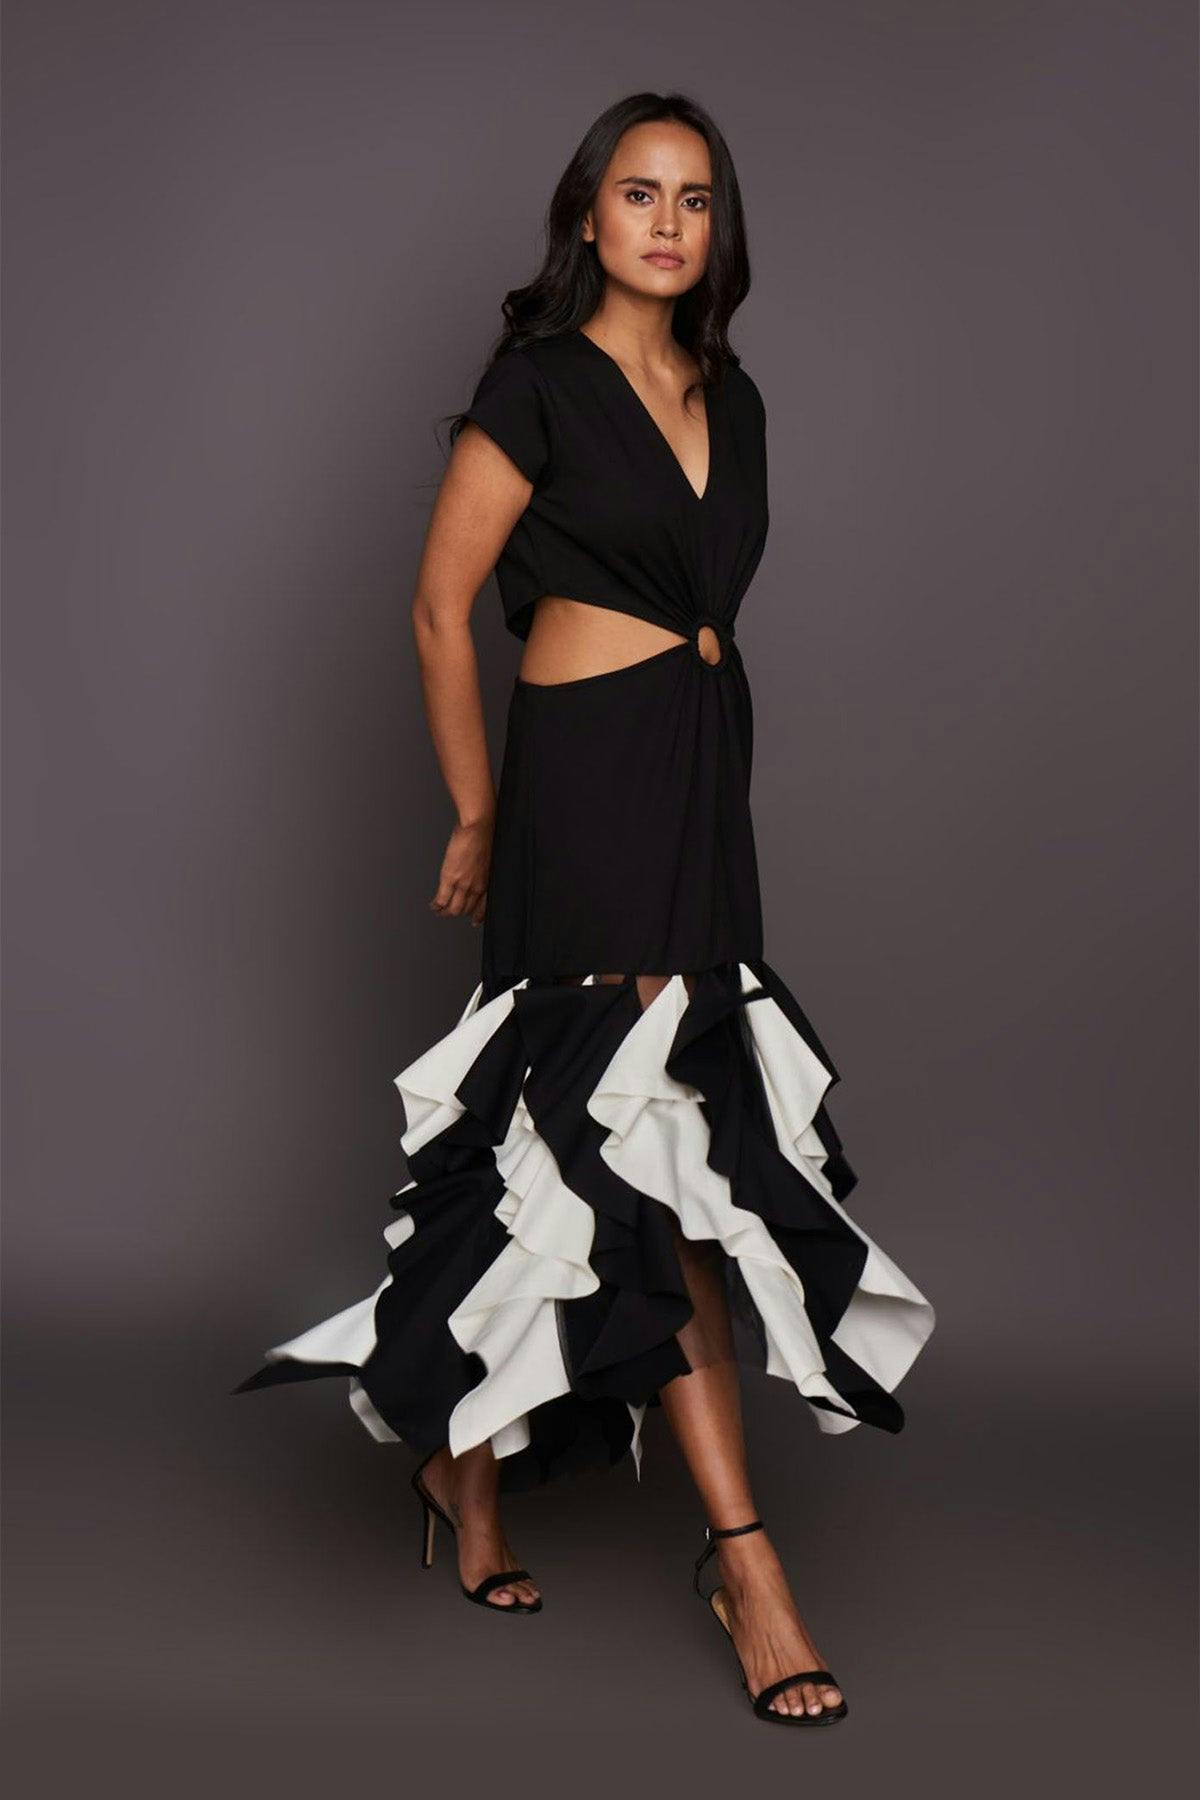 Thumbnail preview #1 for Black & White Side Cutout Dress With Ruffles